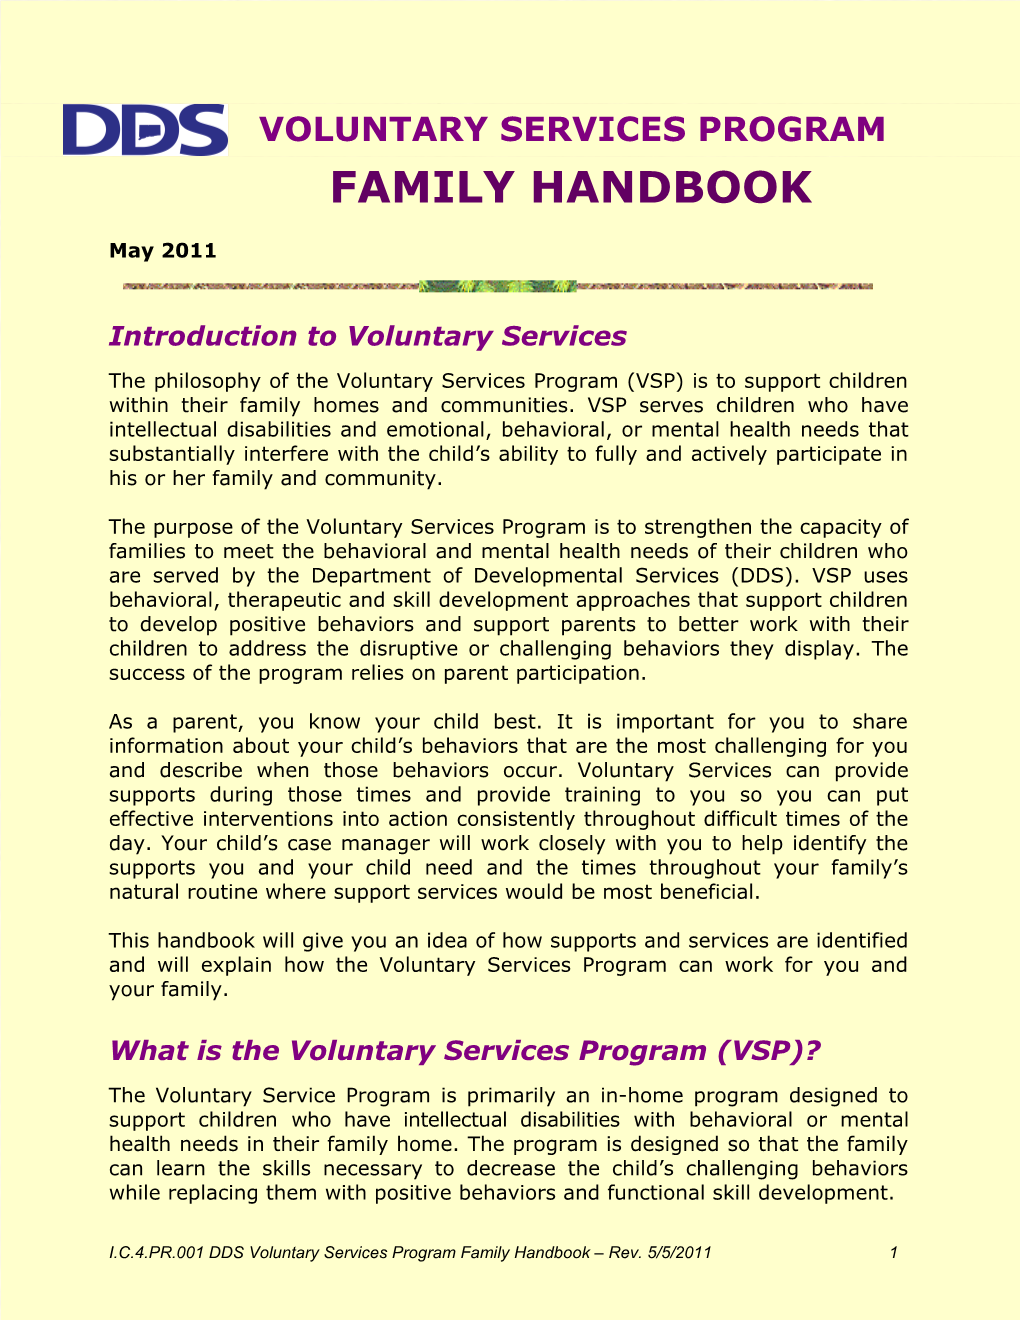 Is My Child Eligible for Voluntary Service?